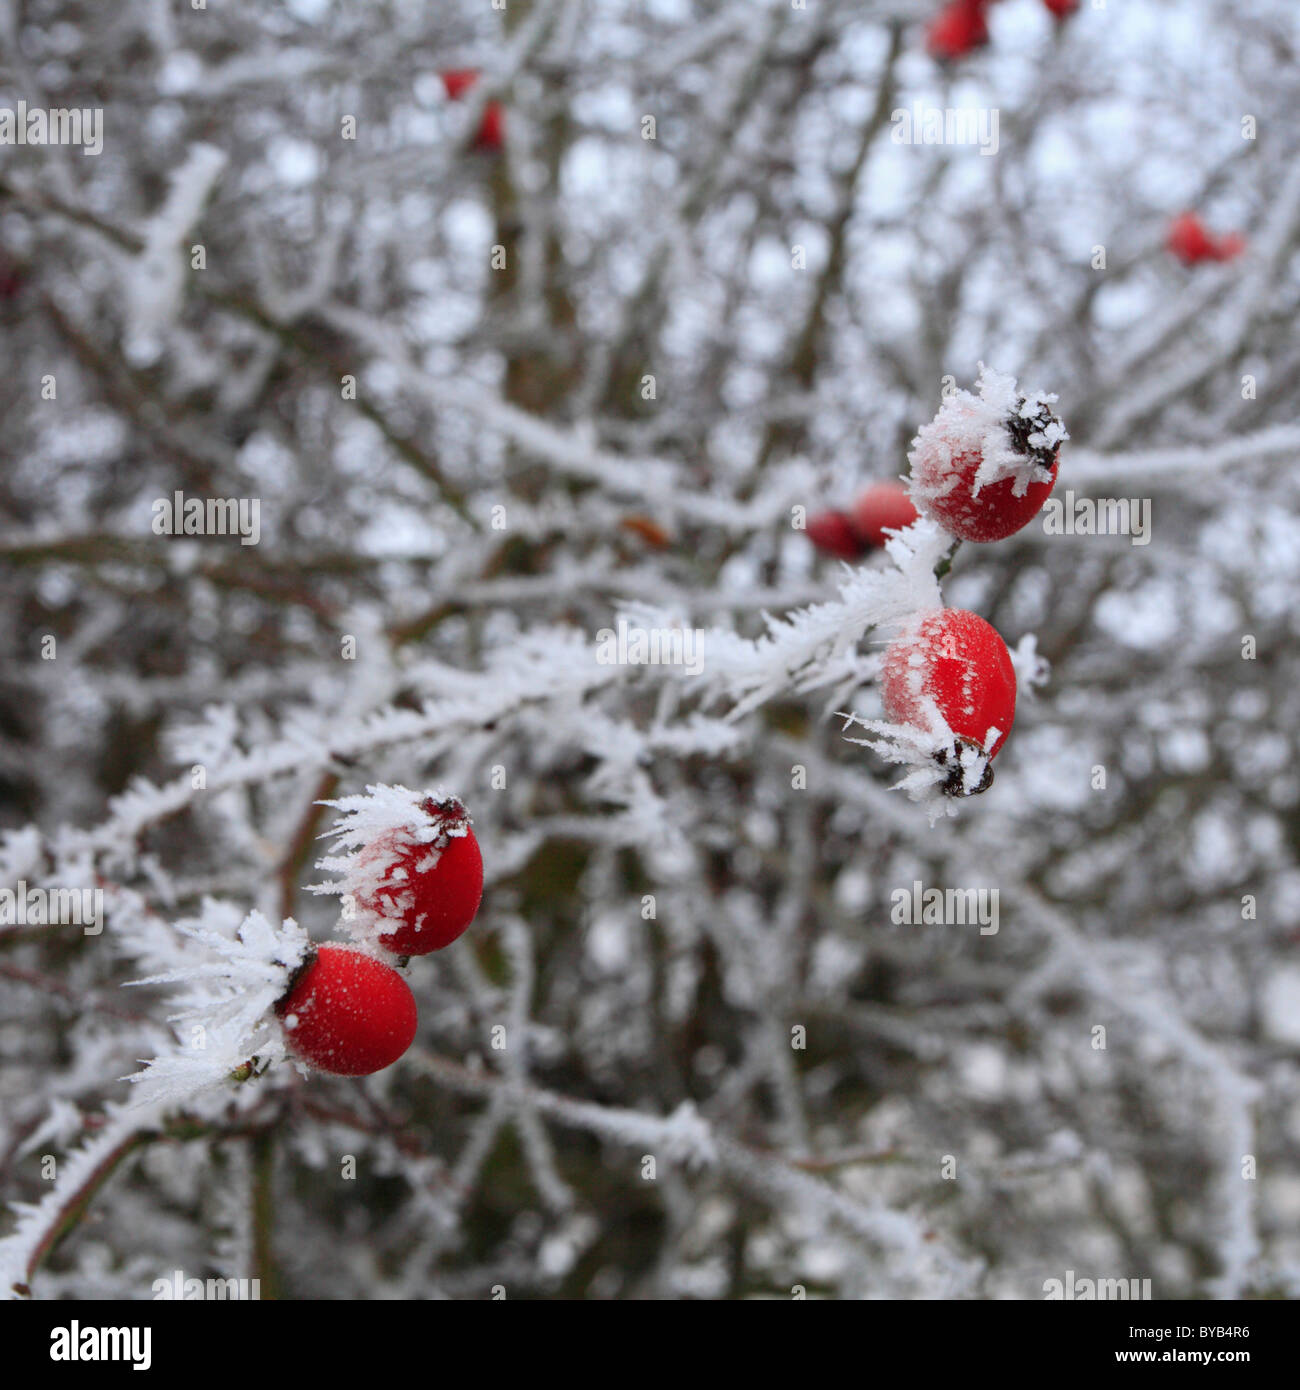 Wild rose hips covered in hoar frost. Stock Photo